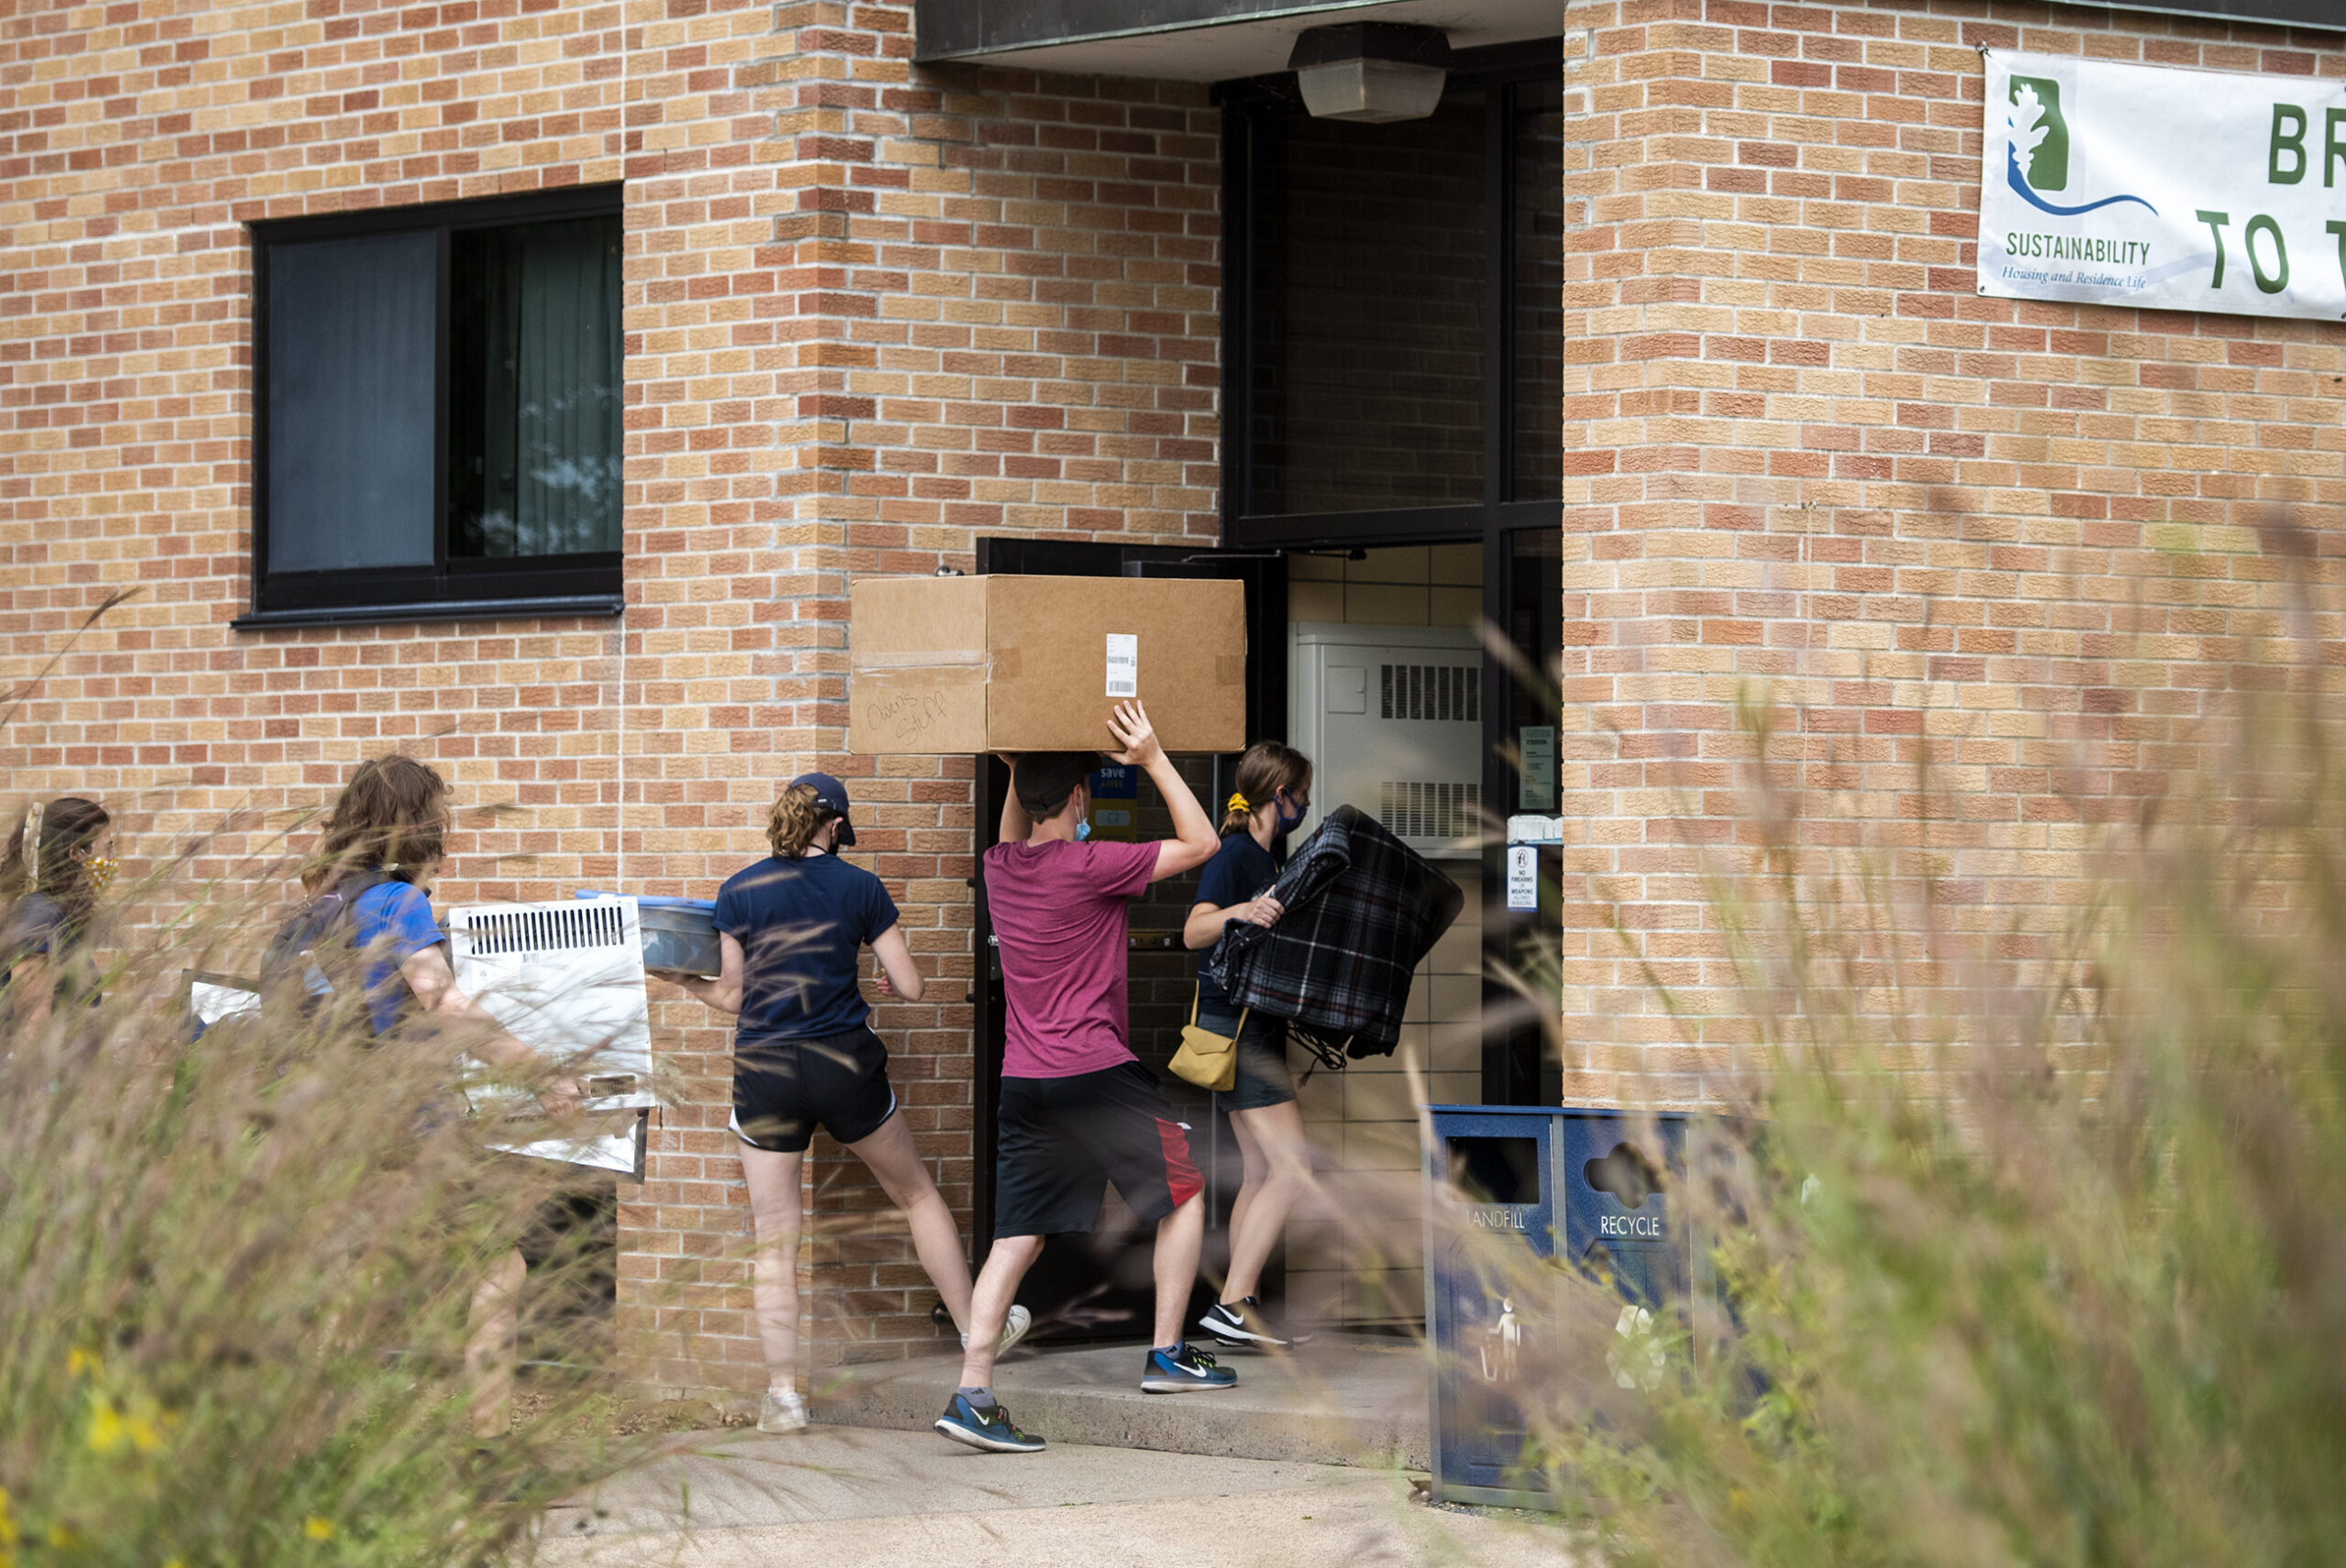 People walk through the door of a residence hall carrying boxes.